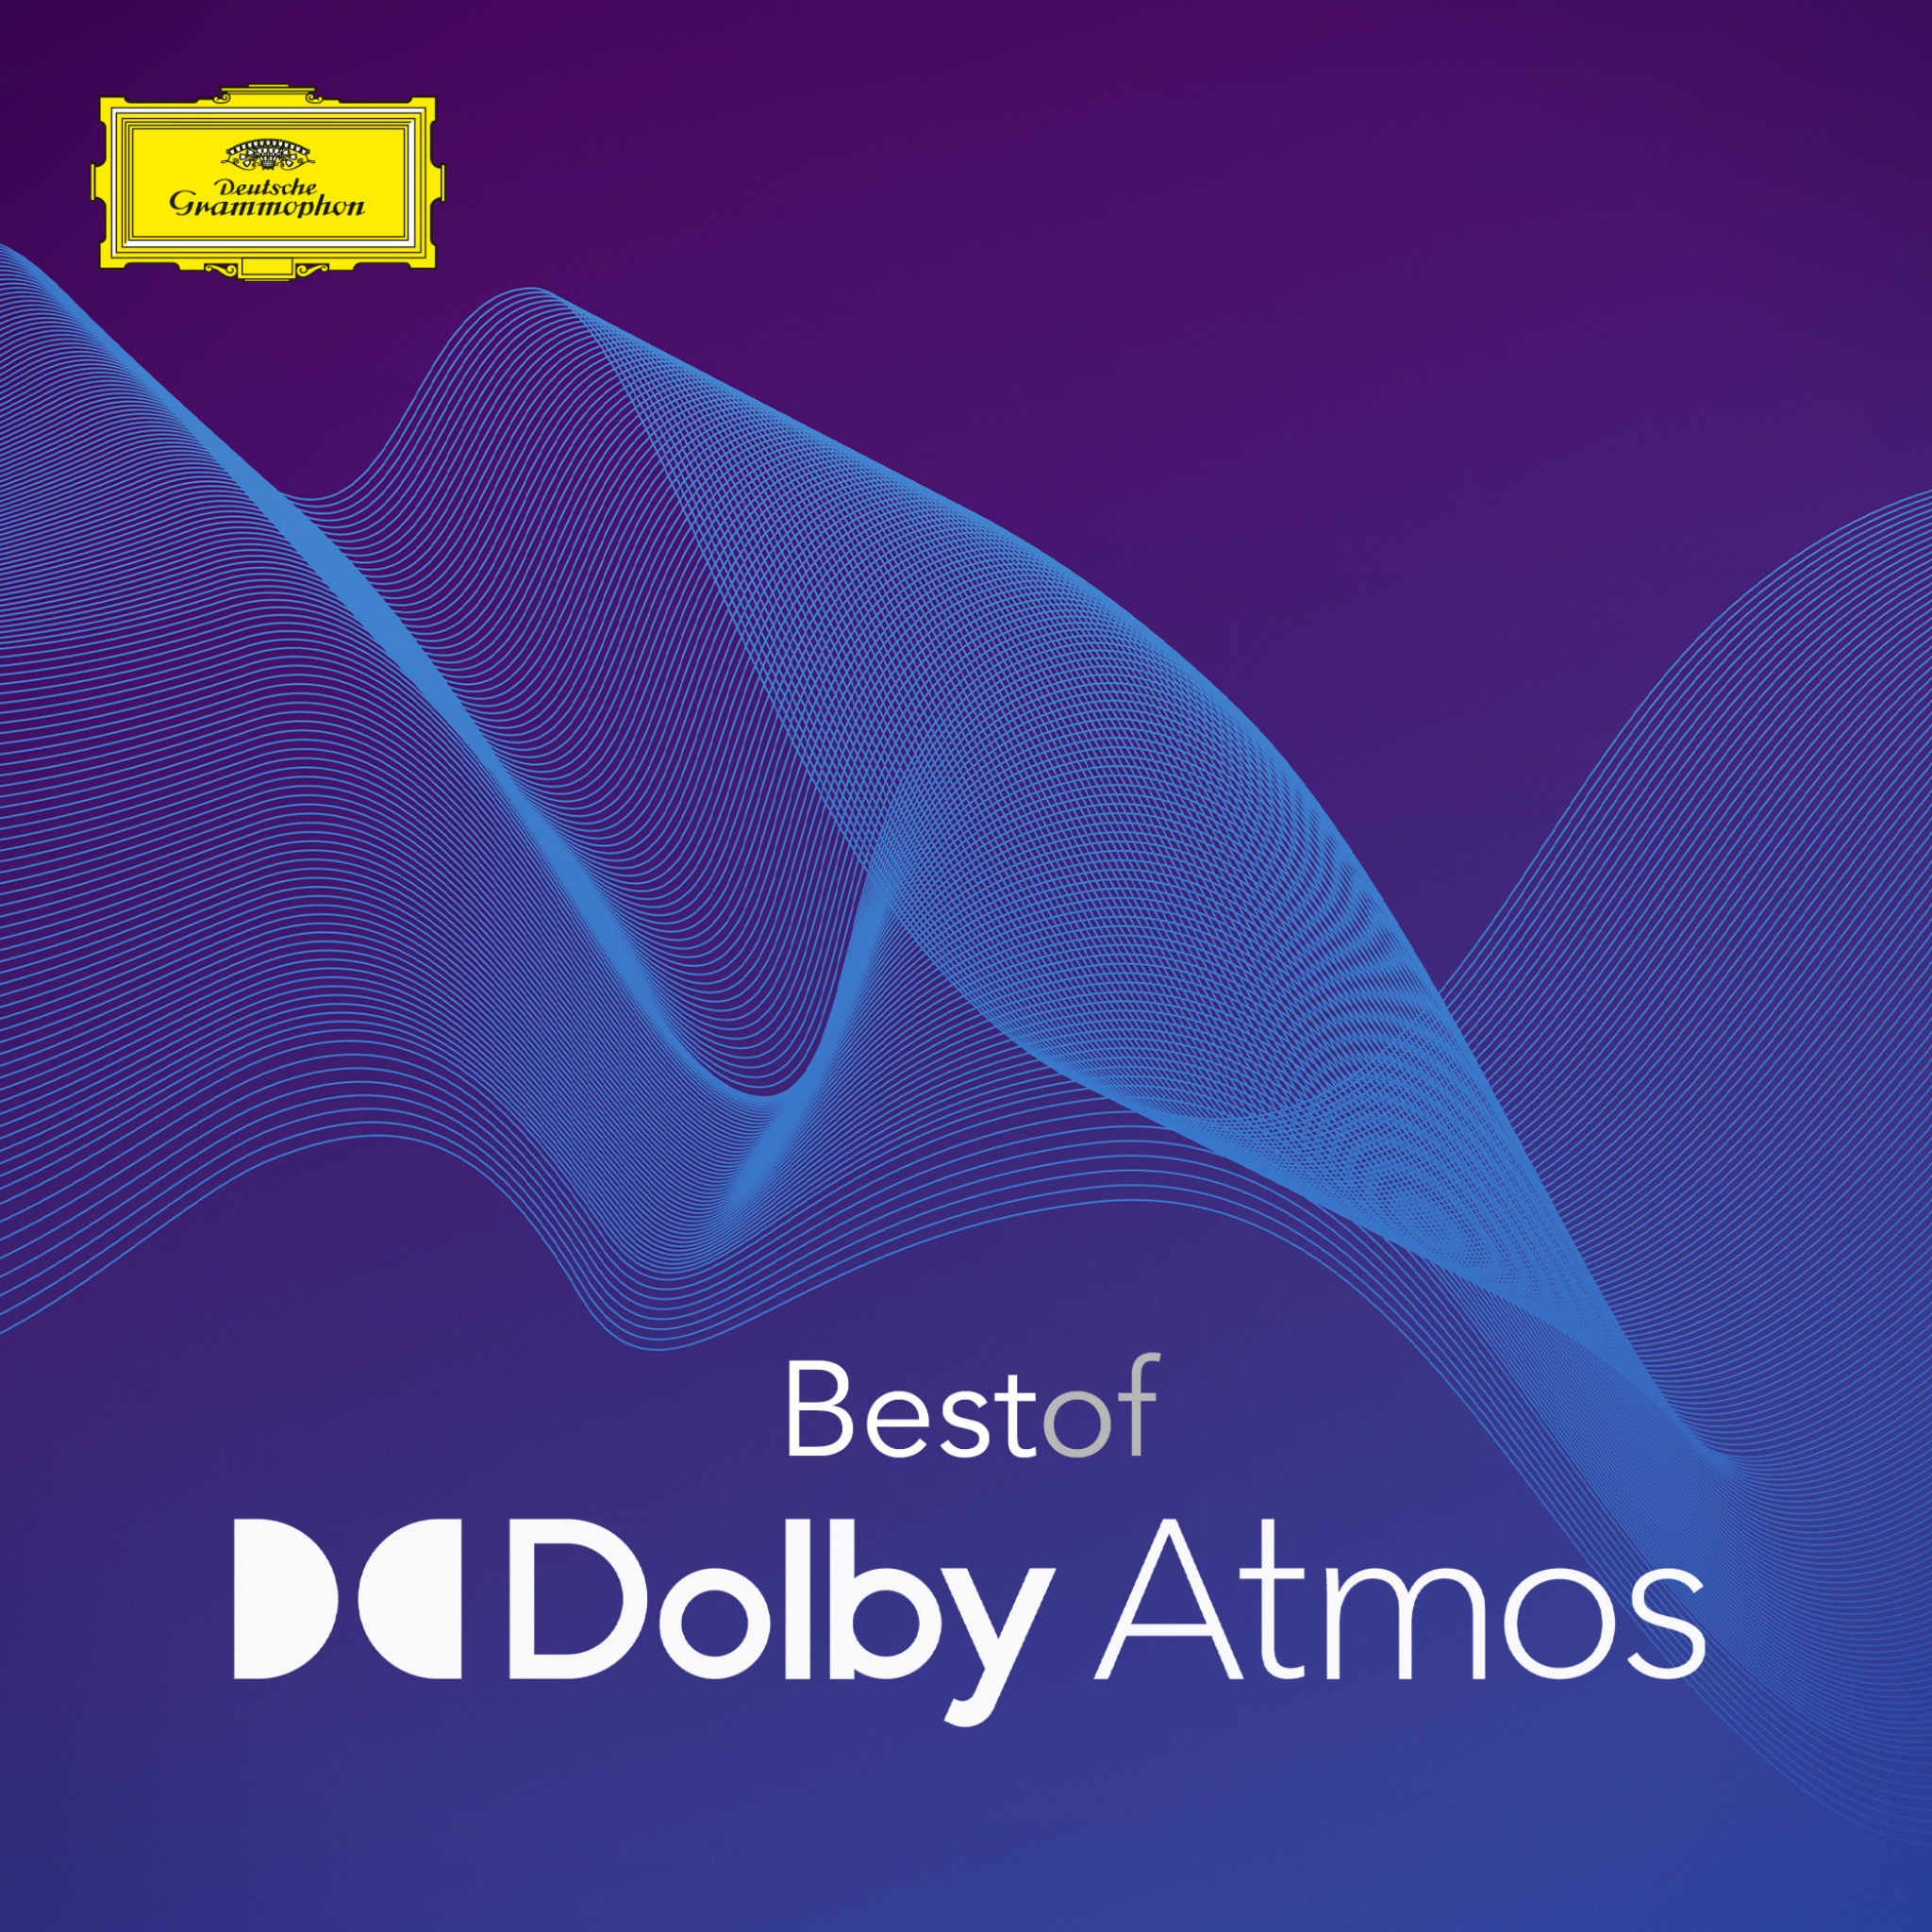 Best of Dolby Atmos Playlist Cover